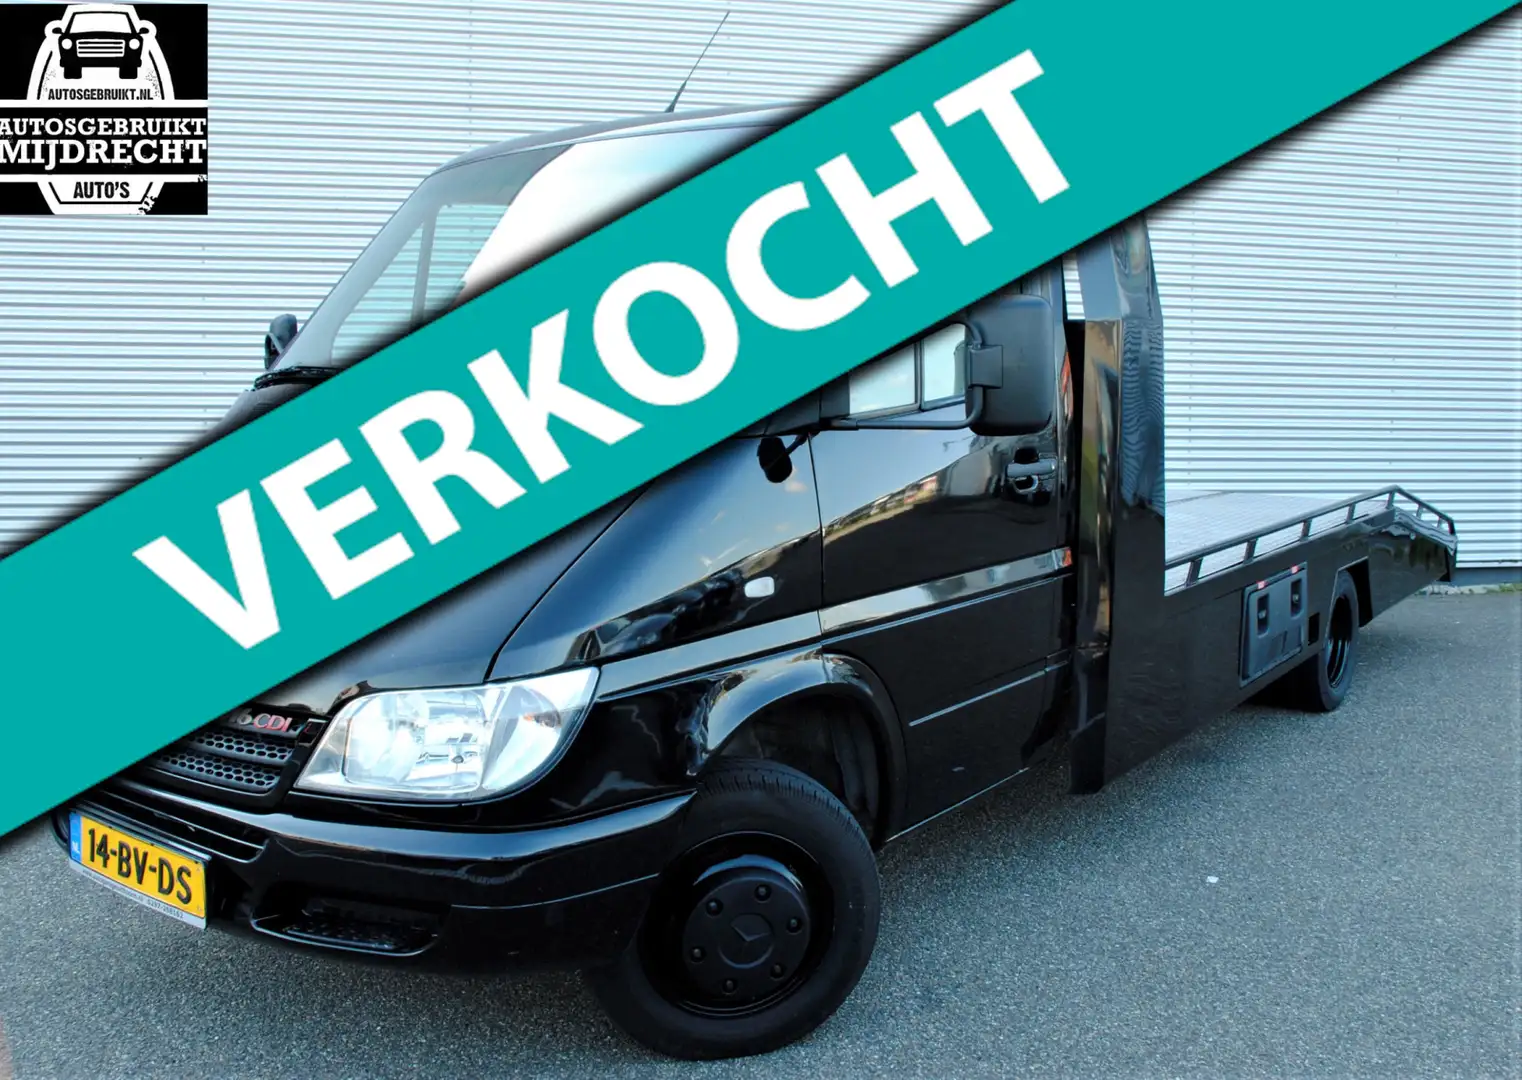 Mercedes-Benz Sprinter 416 CDI 2.7 402/Auto Ambulace/automaat/cruise/goed - 1